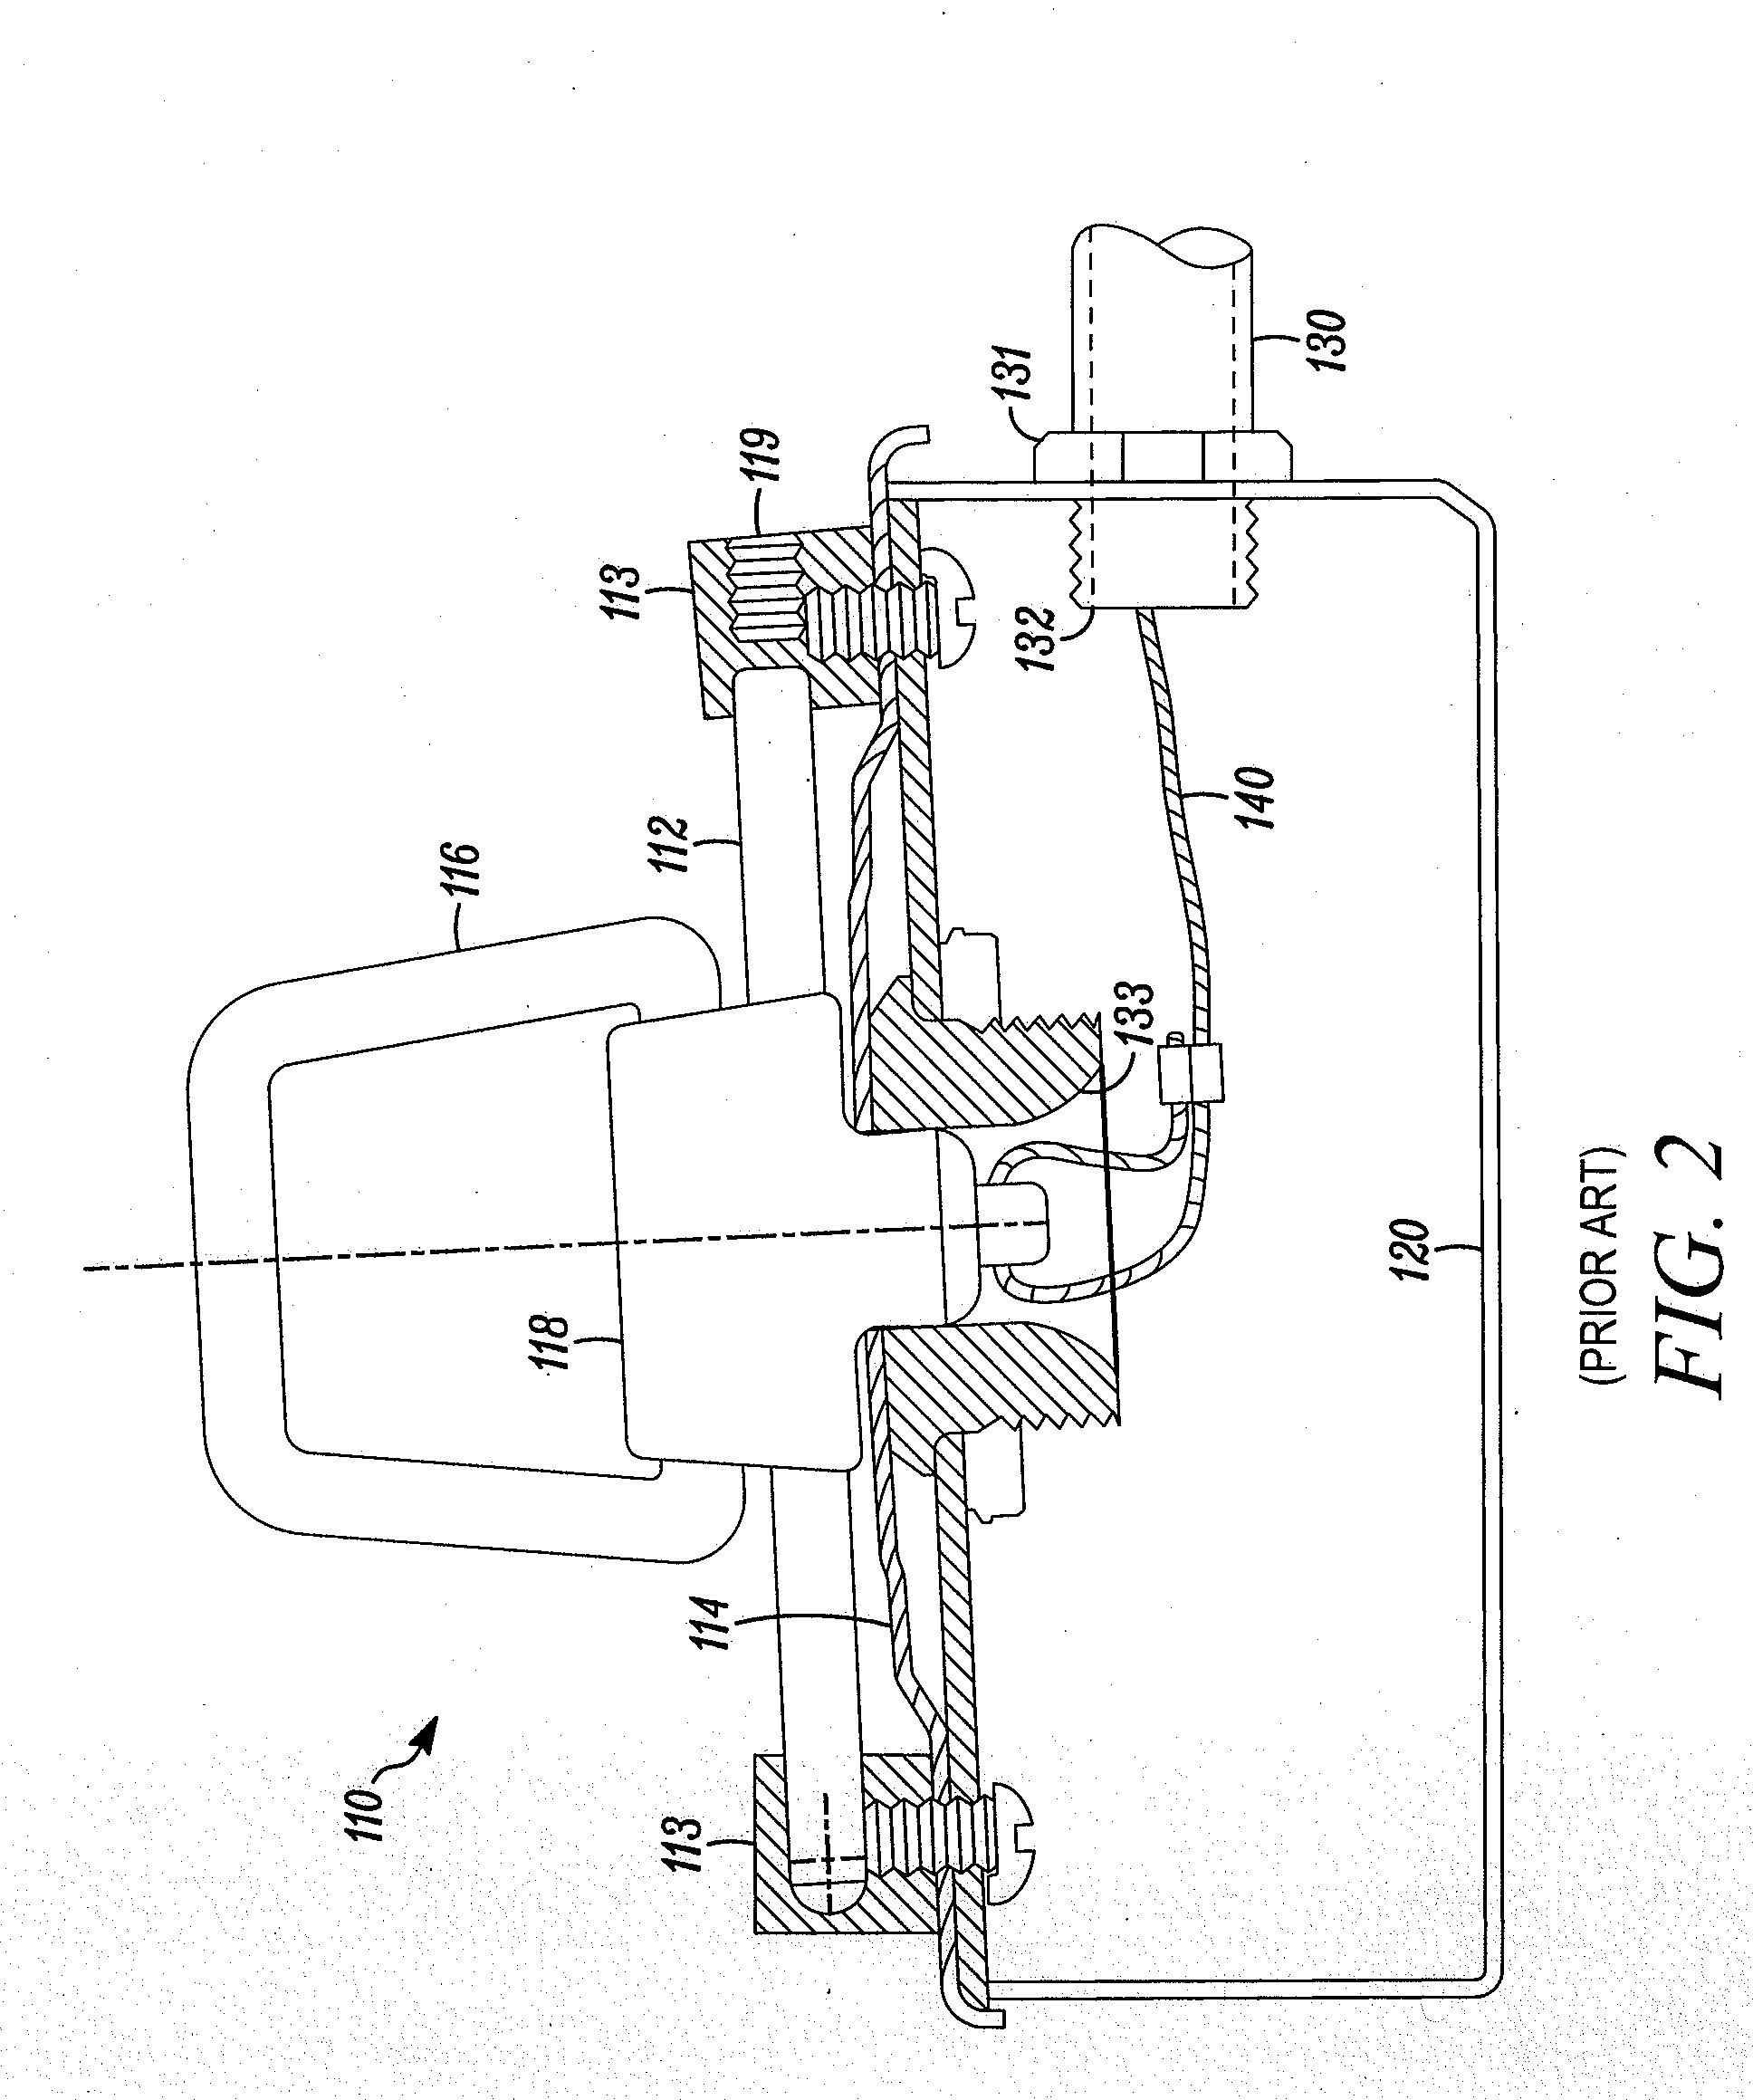 Fire Suppression System and Emergency Annunciation System